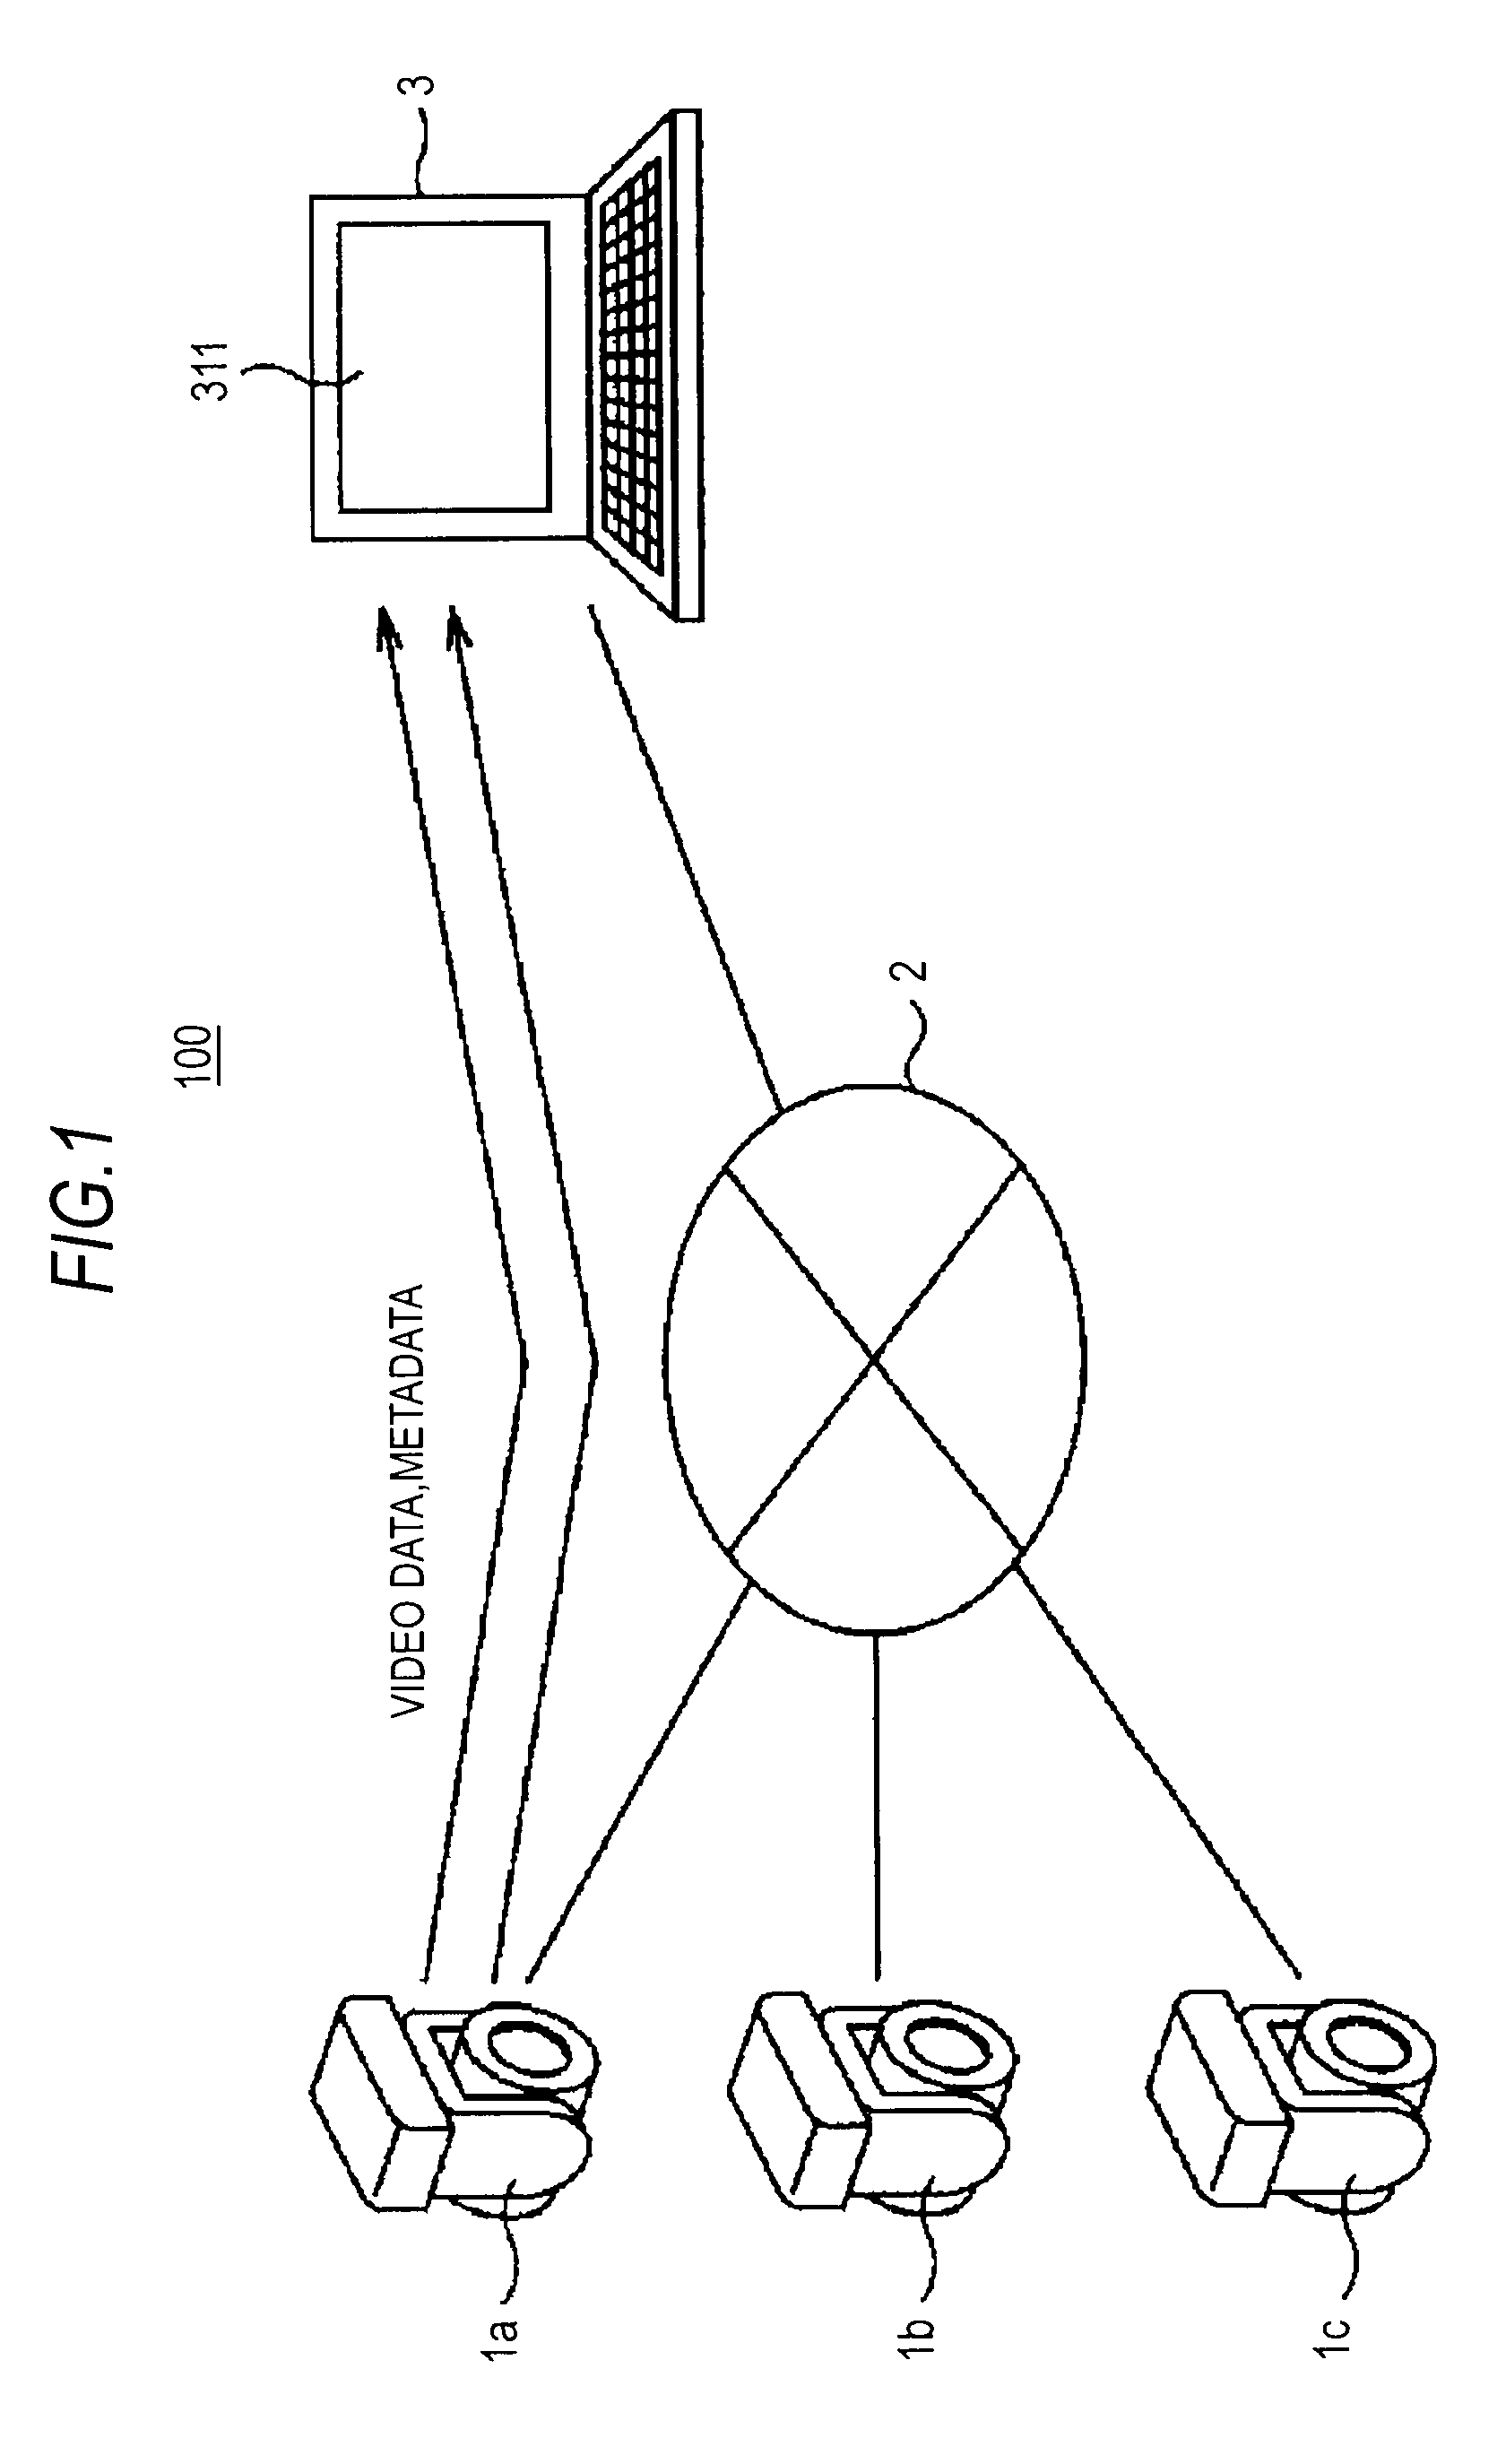 Image processing system, image processing method, and computer program